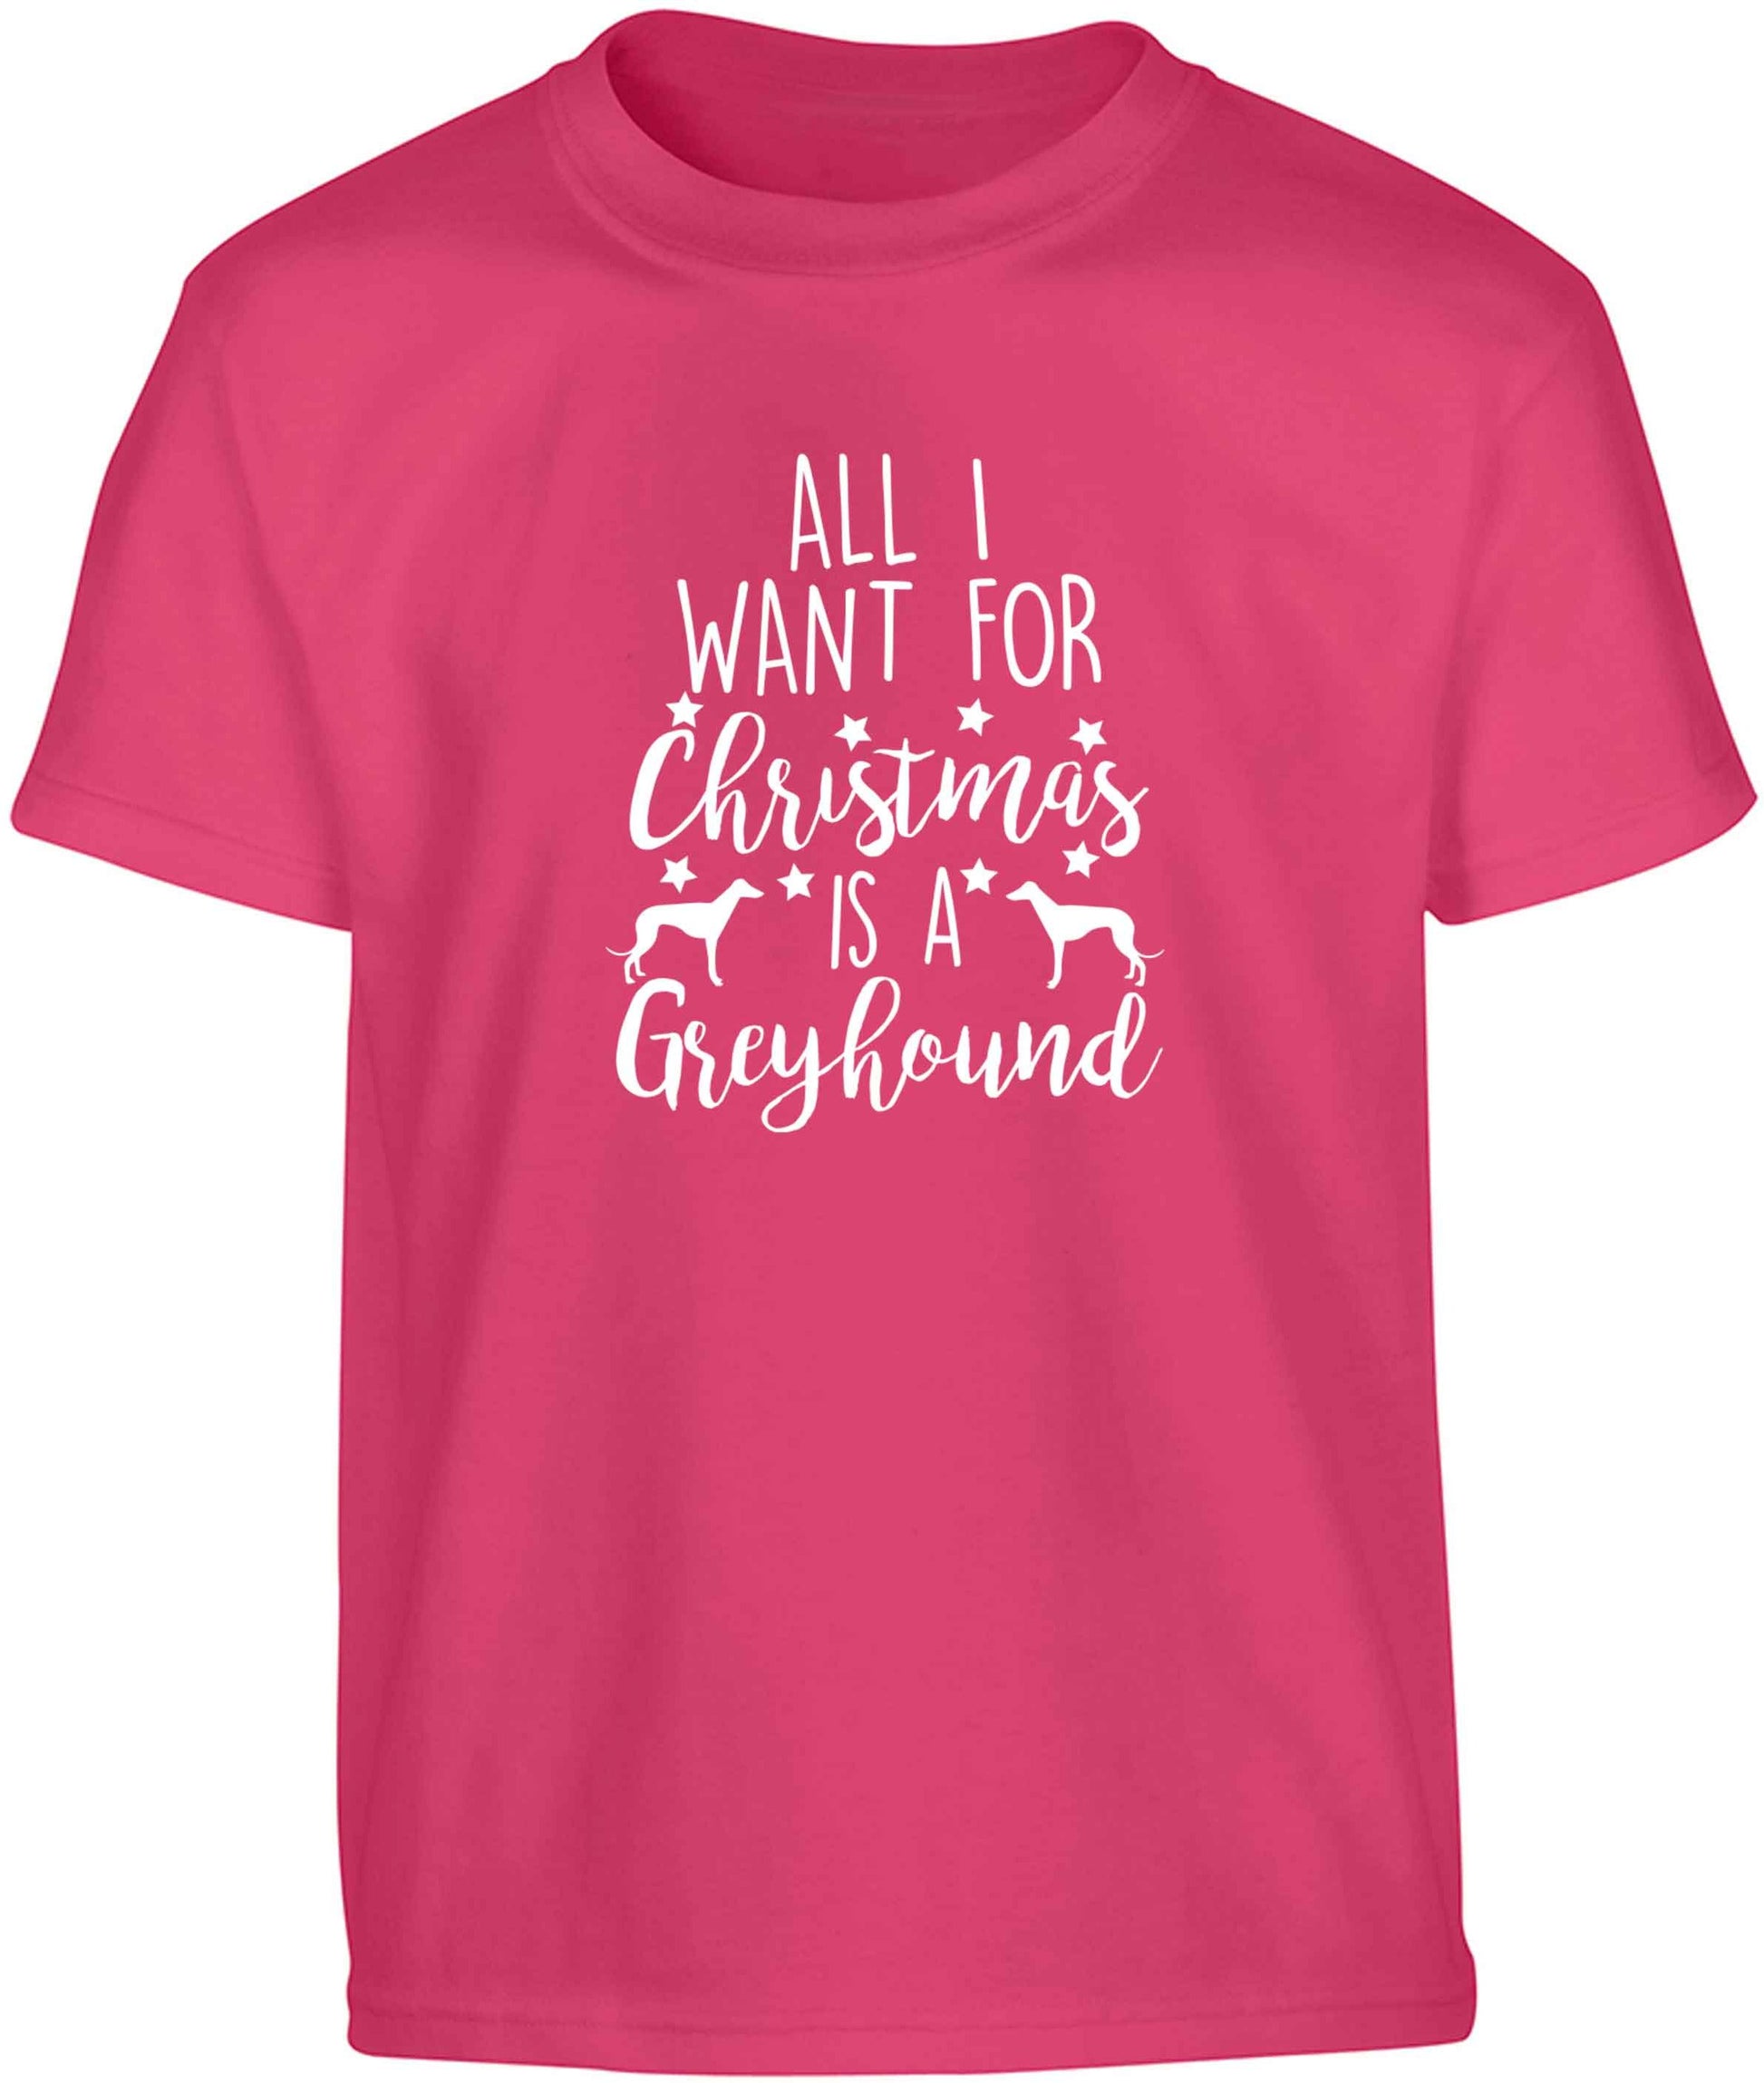 All I want for Christmas is a greyhound Children's pink Tshirt 12-13 Years